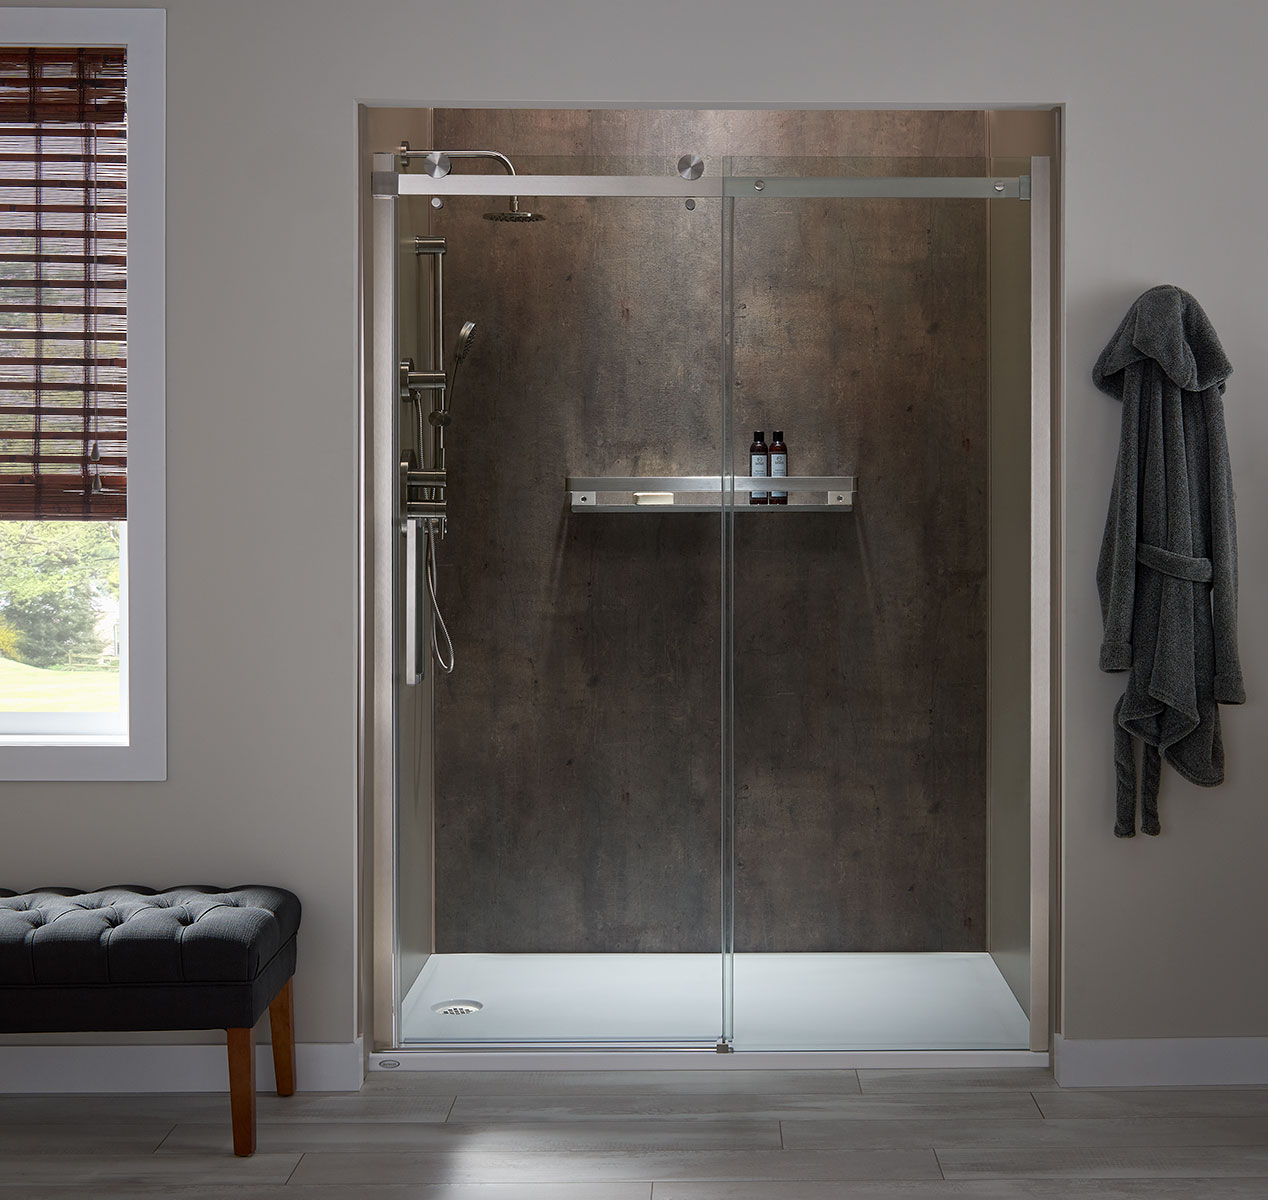 Explore the Features & Benefits of a Jacuzzi® Shower System